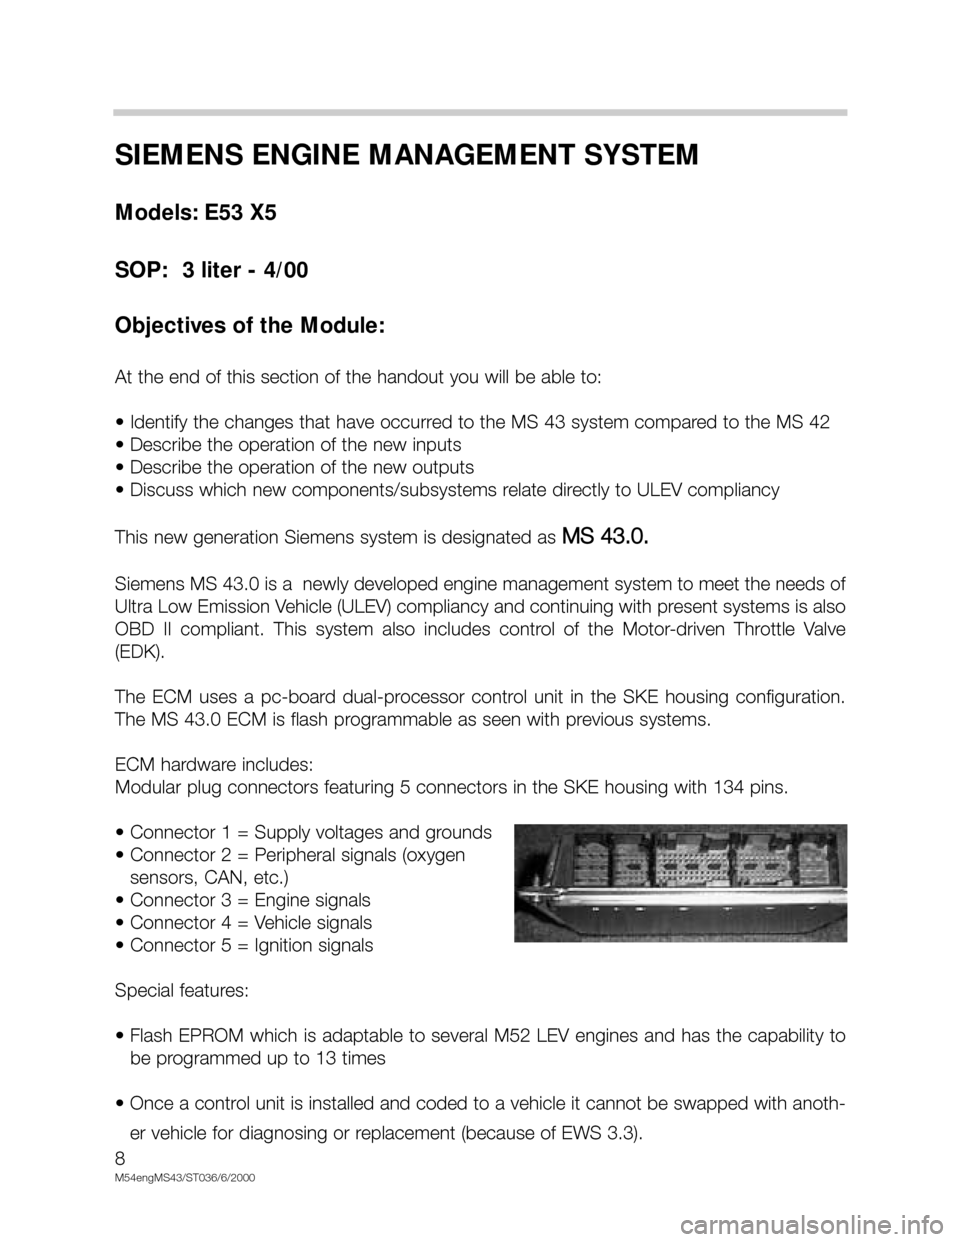 BMW X5 2005 E53 M54 Engine Workshop Manual 8
M54engMS43/ST036/6/2000
SIEMENS ENGINE MANAGEMENT SYSTEM
Models: E53 X5
SOP:  3 liter - 4/00
Objectives of the Module:
At the end of this section of the handout you will be able to:
• Identify the